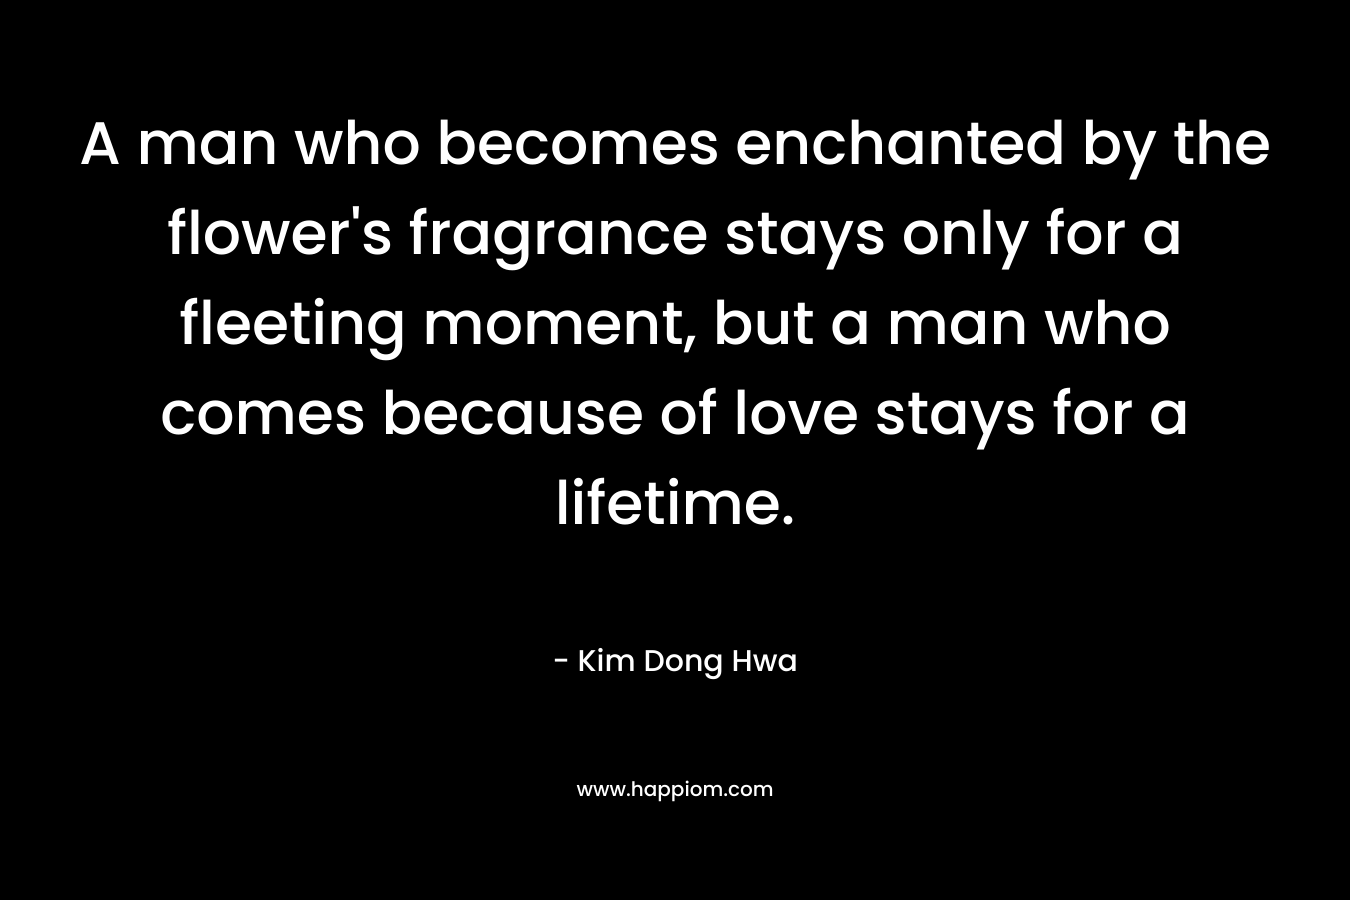 A man who becomes enchanted by the flower’s fragrance stays only for a fleeting moment, but a man who comes because of love stays for a lifetime. – Kim Dong Hwa